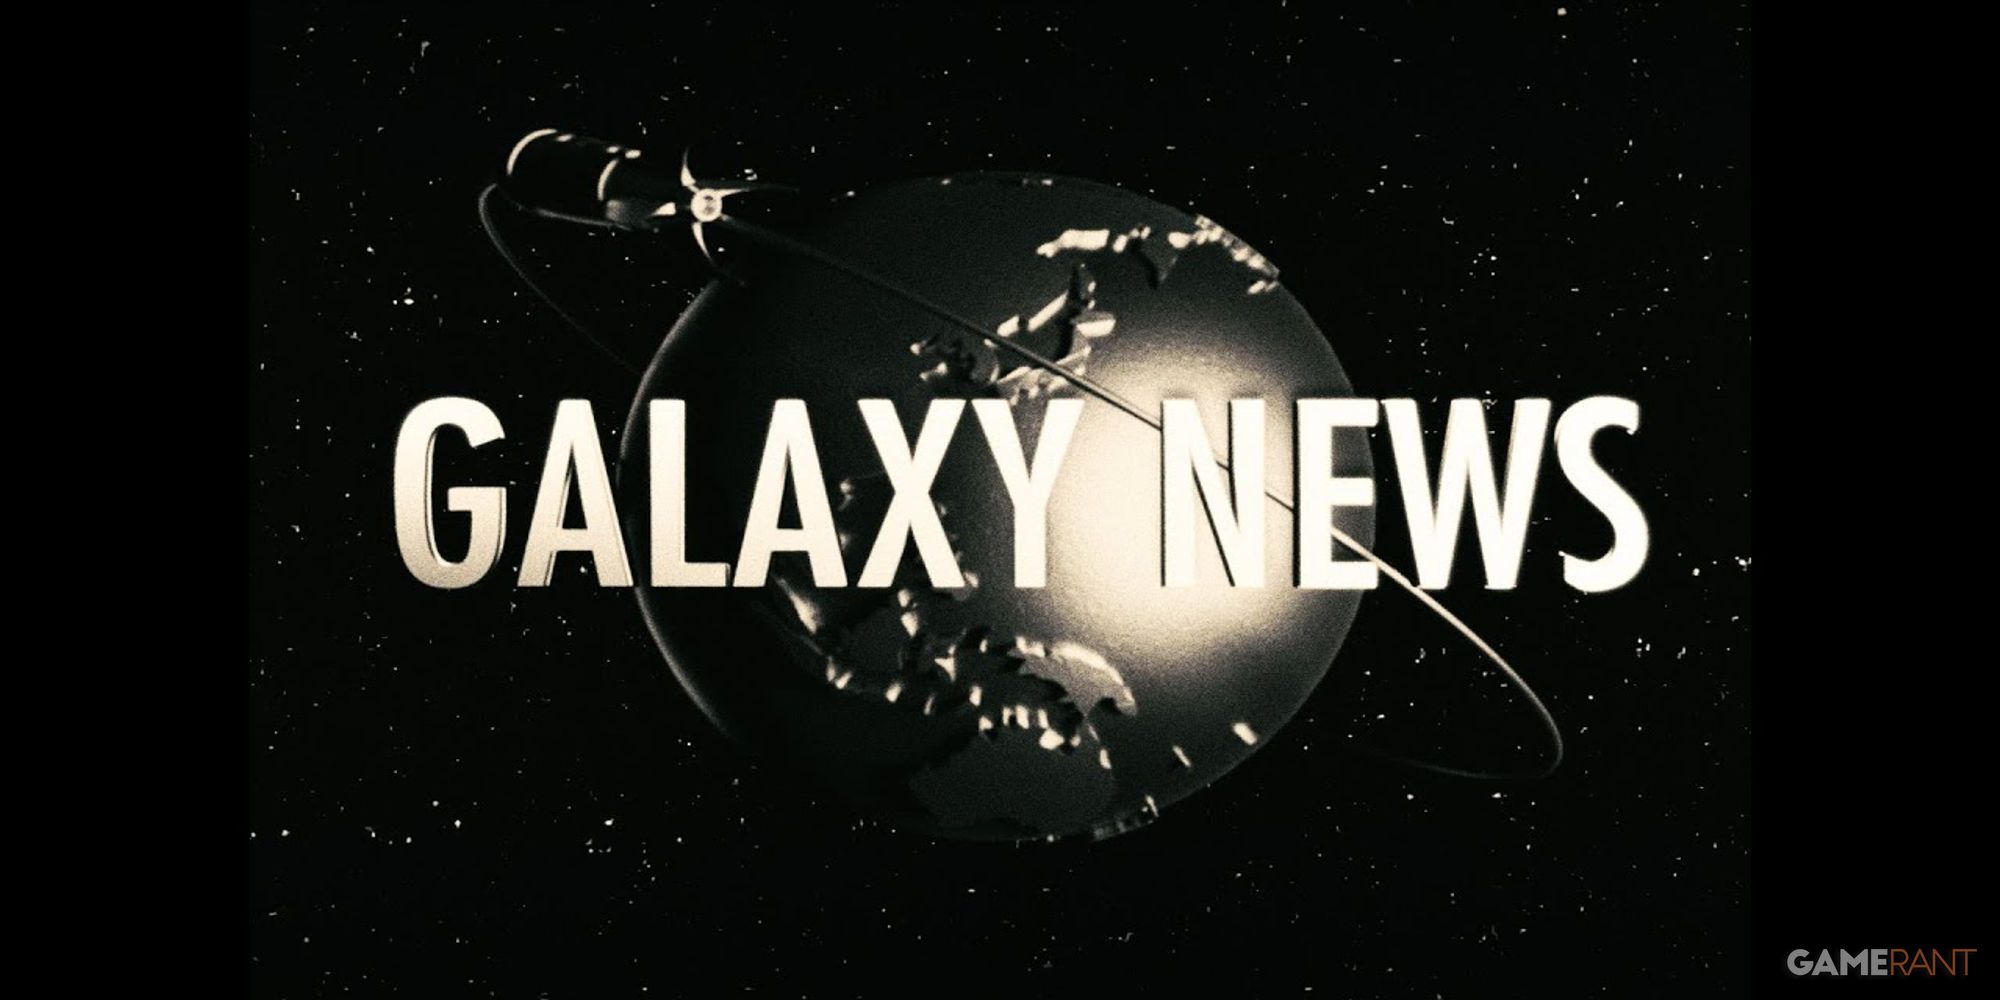 The Galaxy News Intro from Fallout